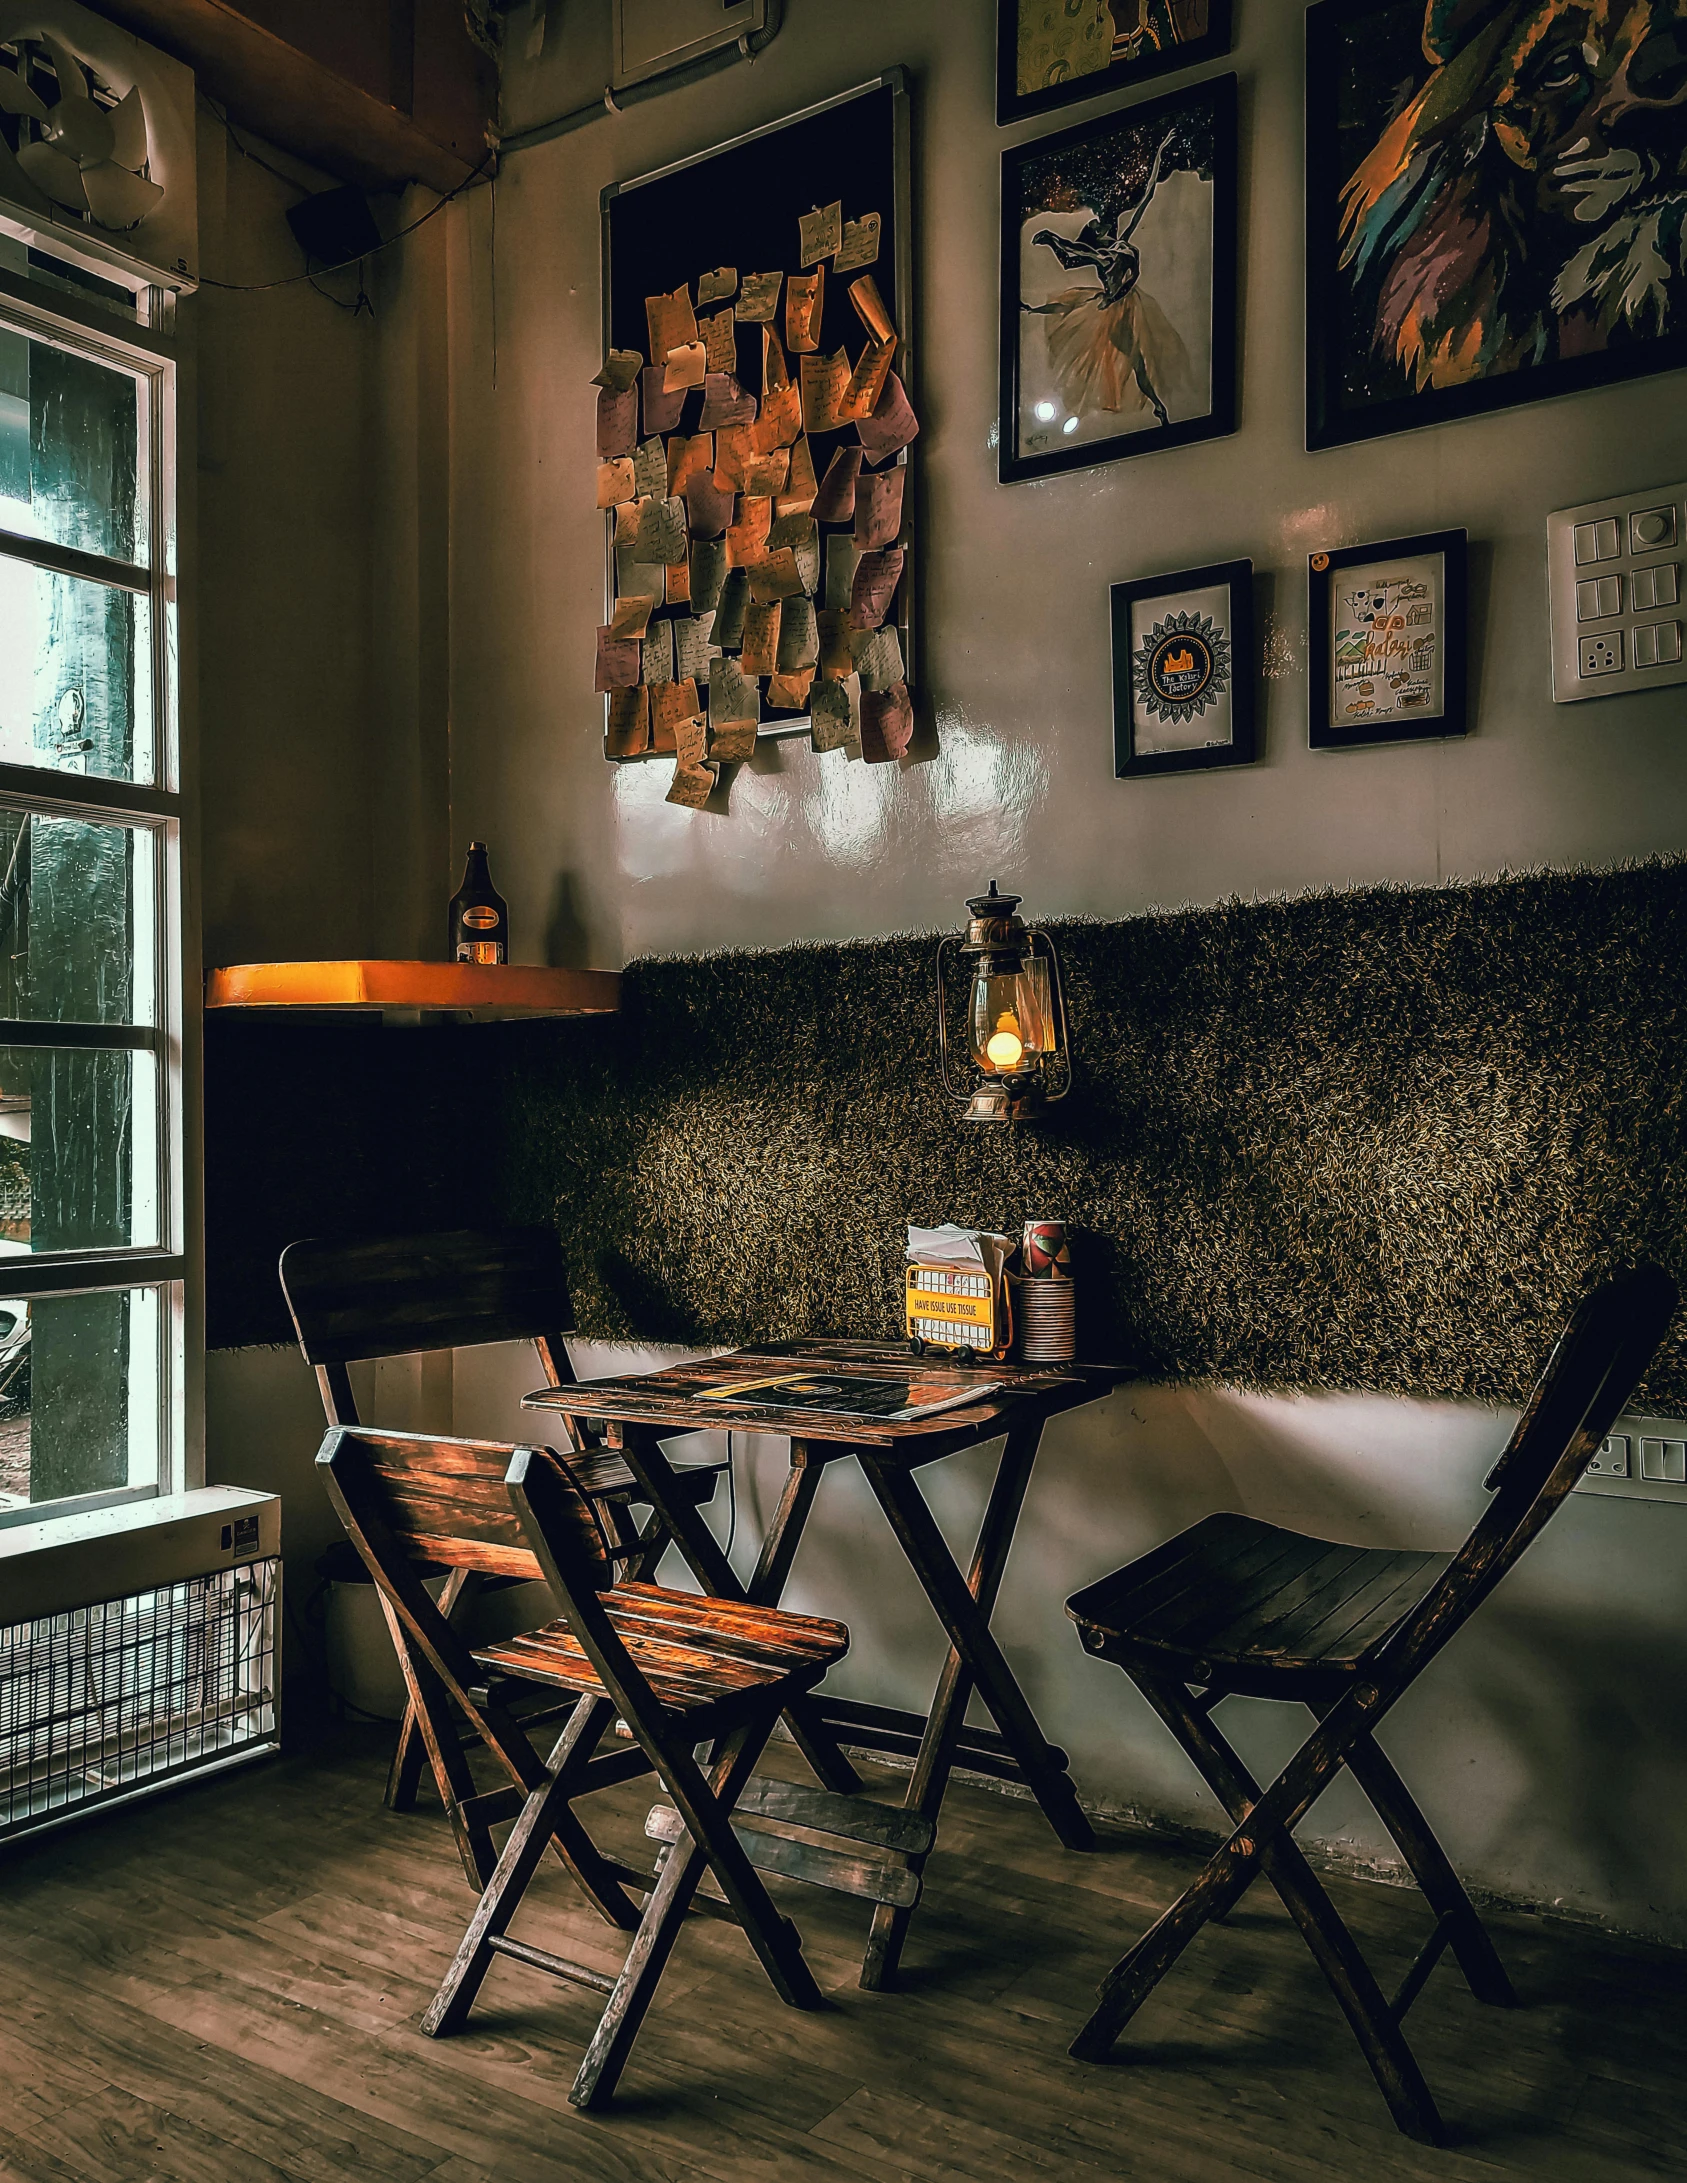 a table and chairs in front of a window, a portrait, by Robbie Trevino, pexels contest winner, art nouveau, cafe lighting, terrarium lounge area, great textures and lighting, actual photo